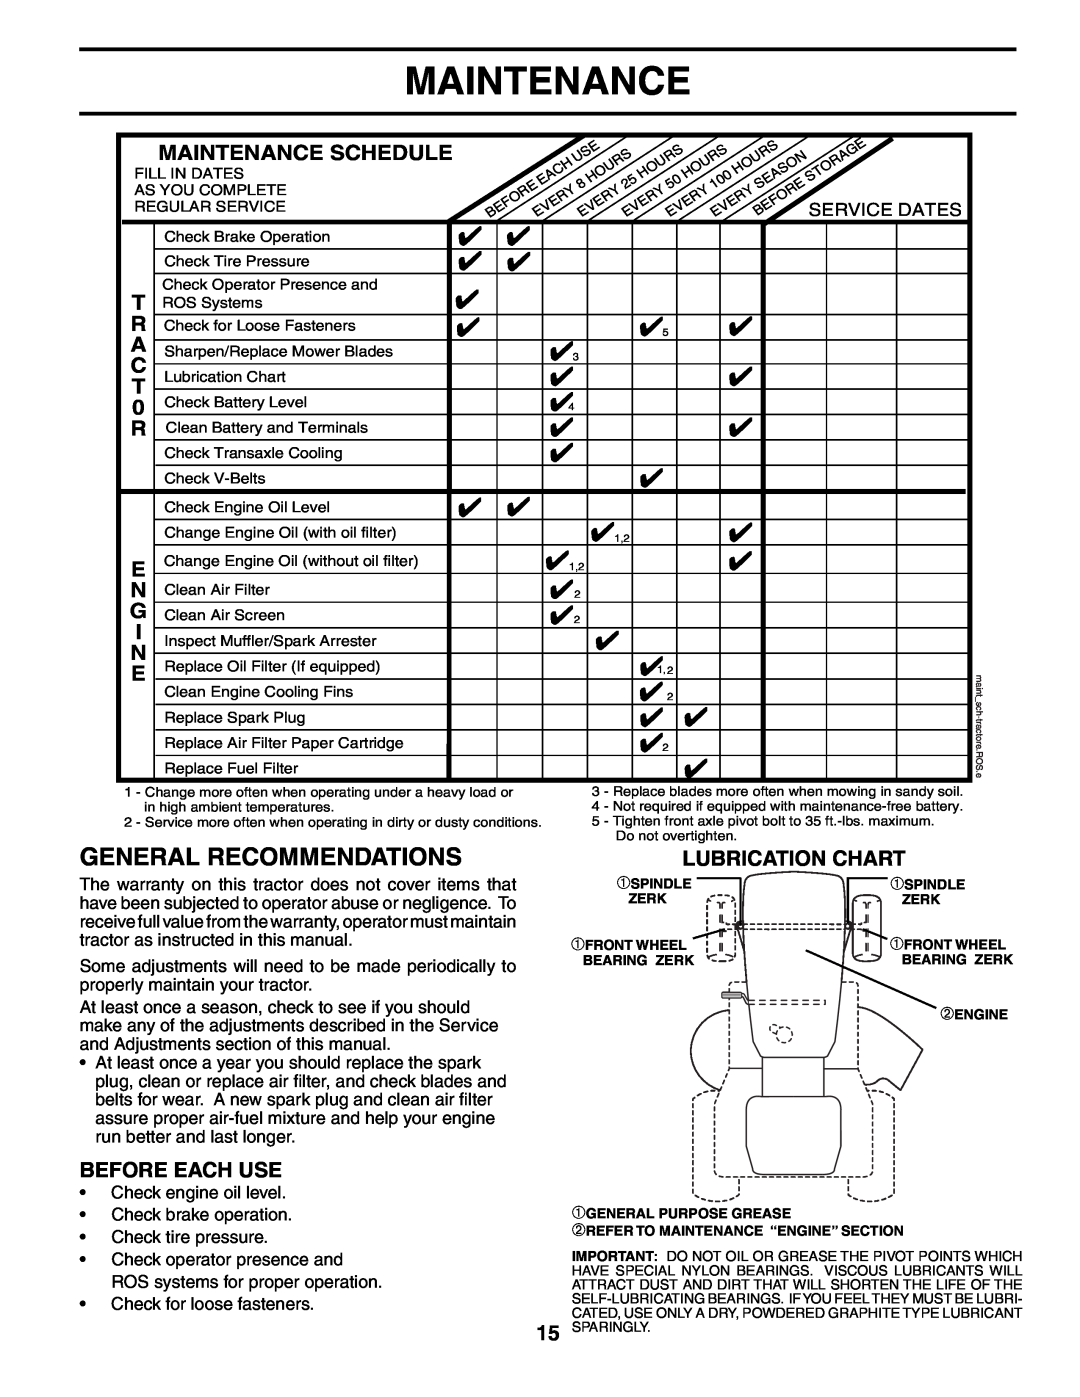 Poulan 196085 manual General Recommendations, Lubrication Chart, Before Each Use, Maintenance Schedule 